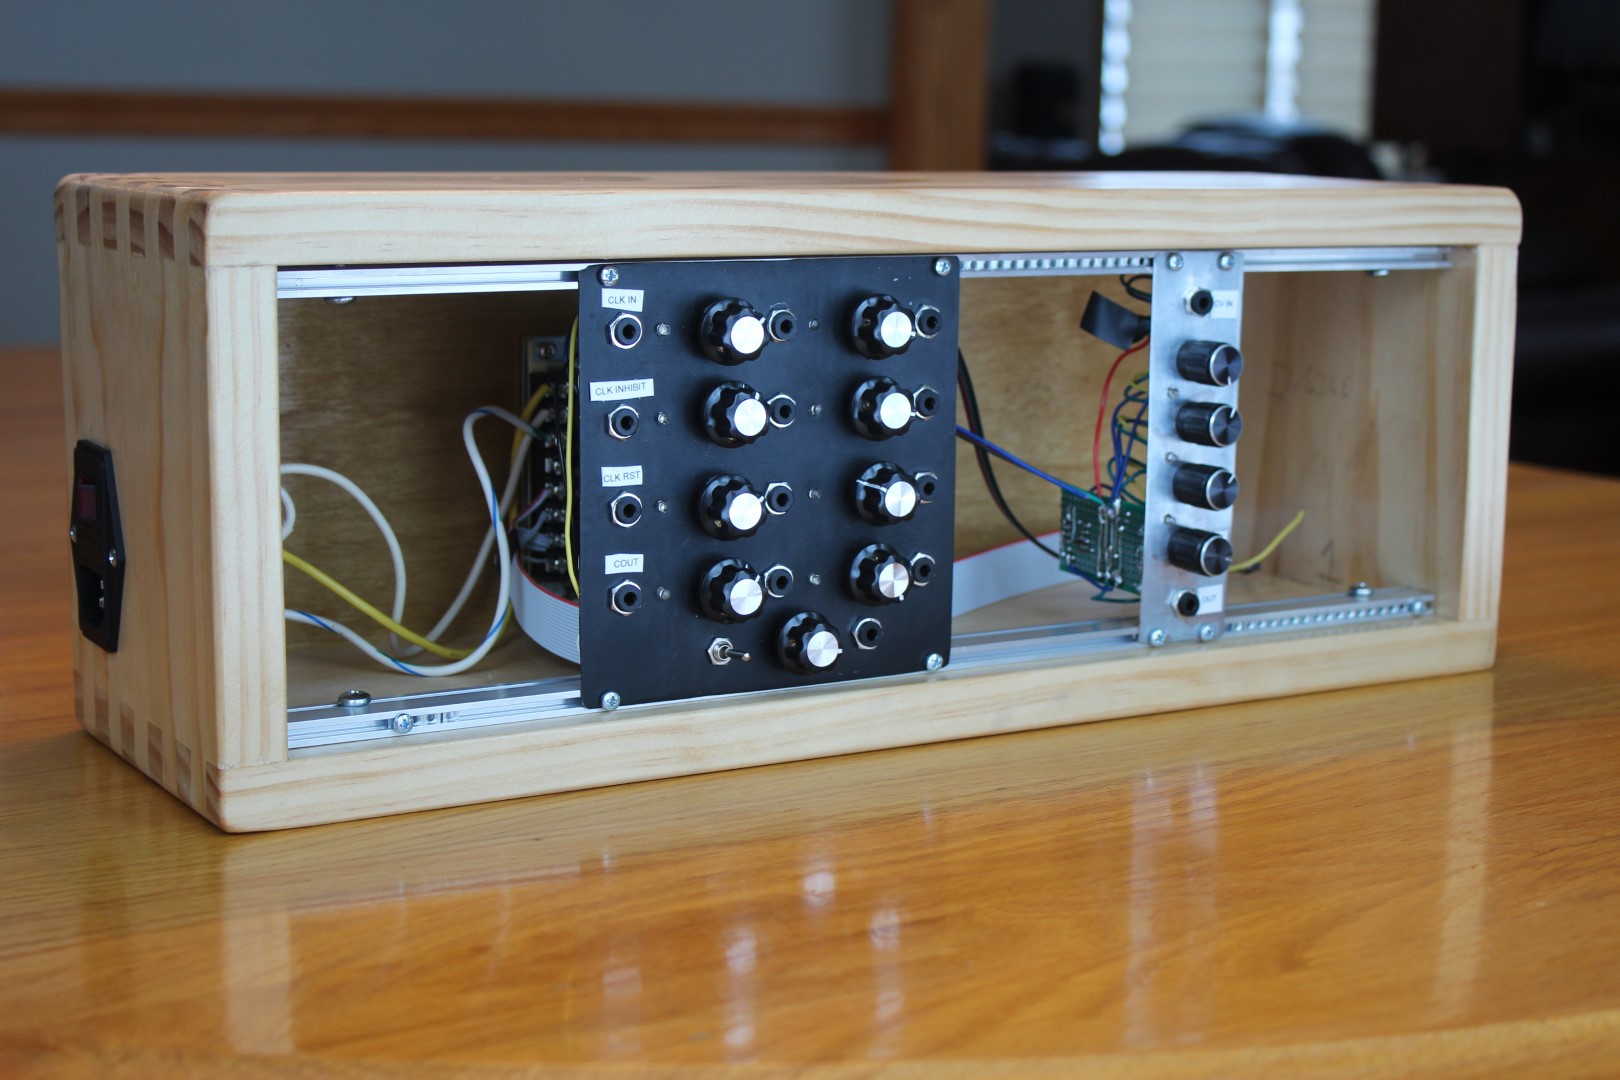 Front view of a 3U eurorack case